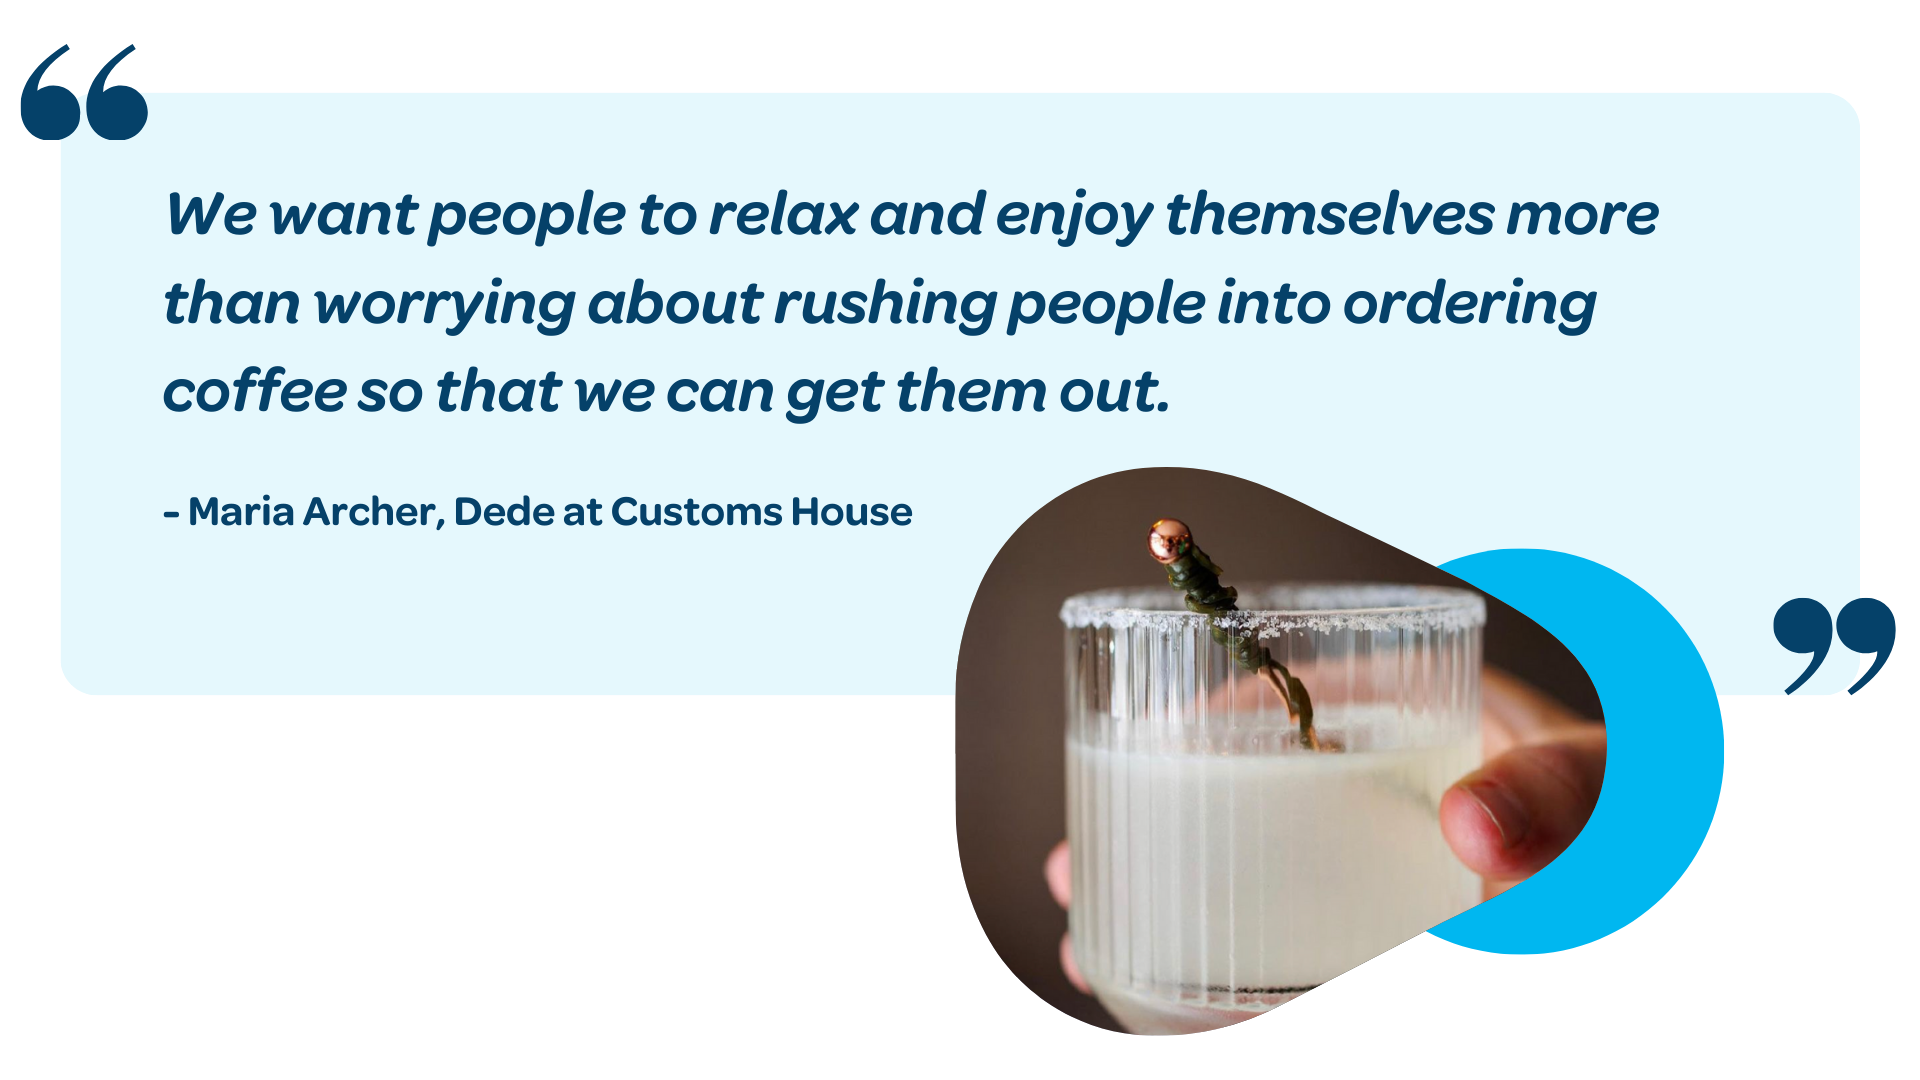 We want people to relax and enjoy themselves more than worrying about rushing people into ordering coffee so that we can get them out